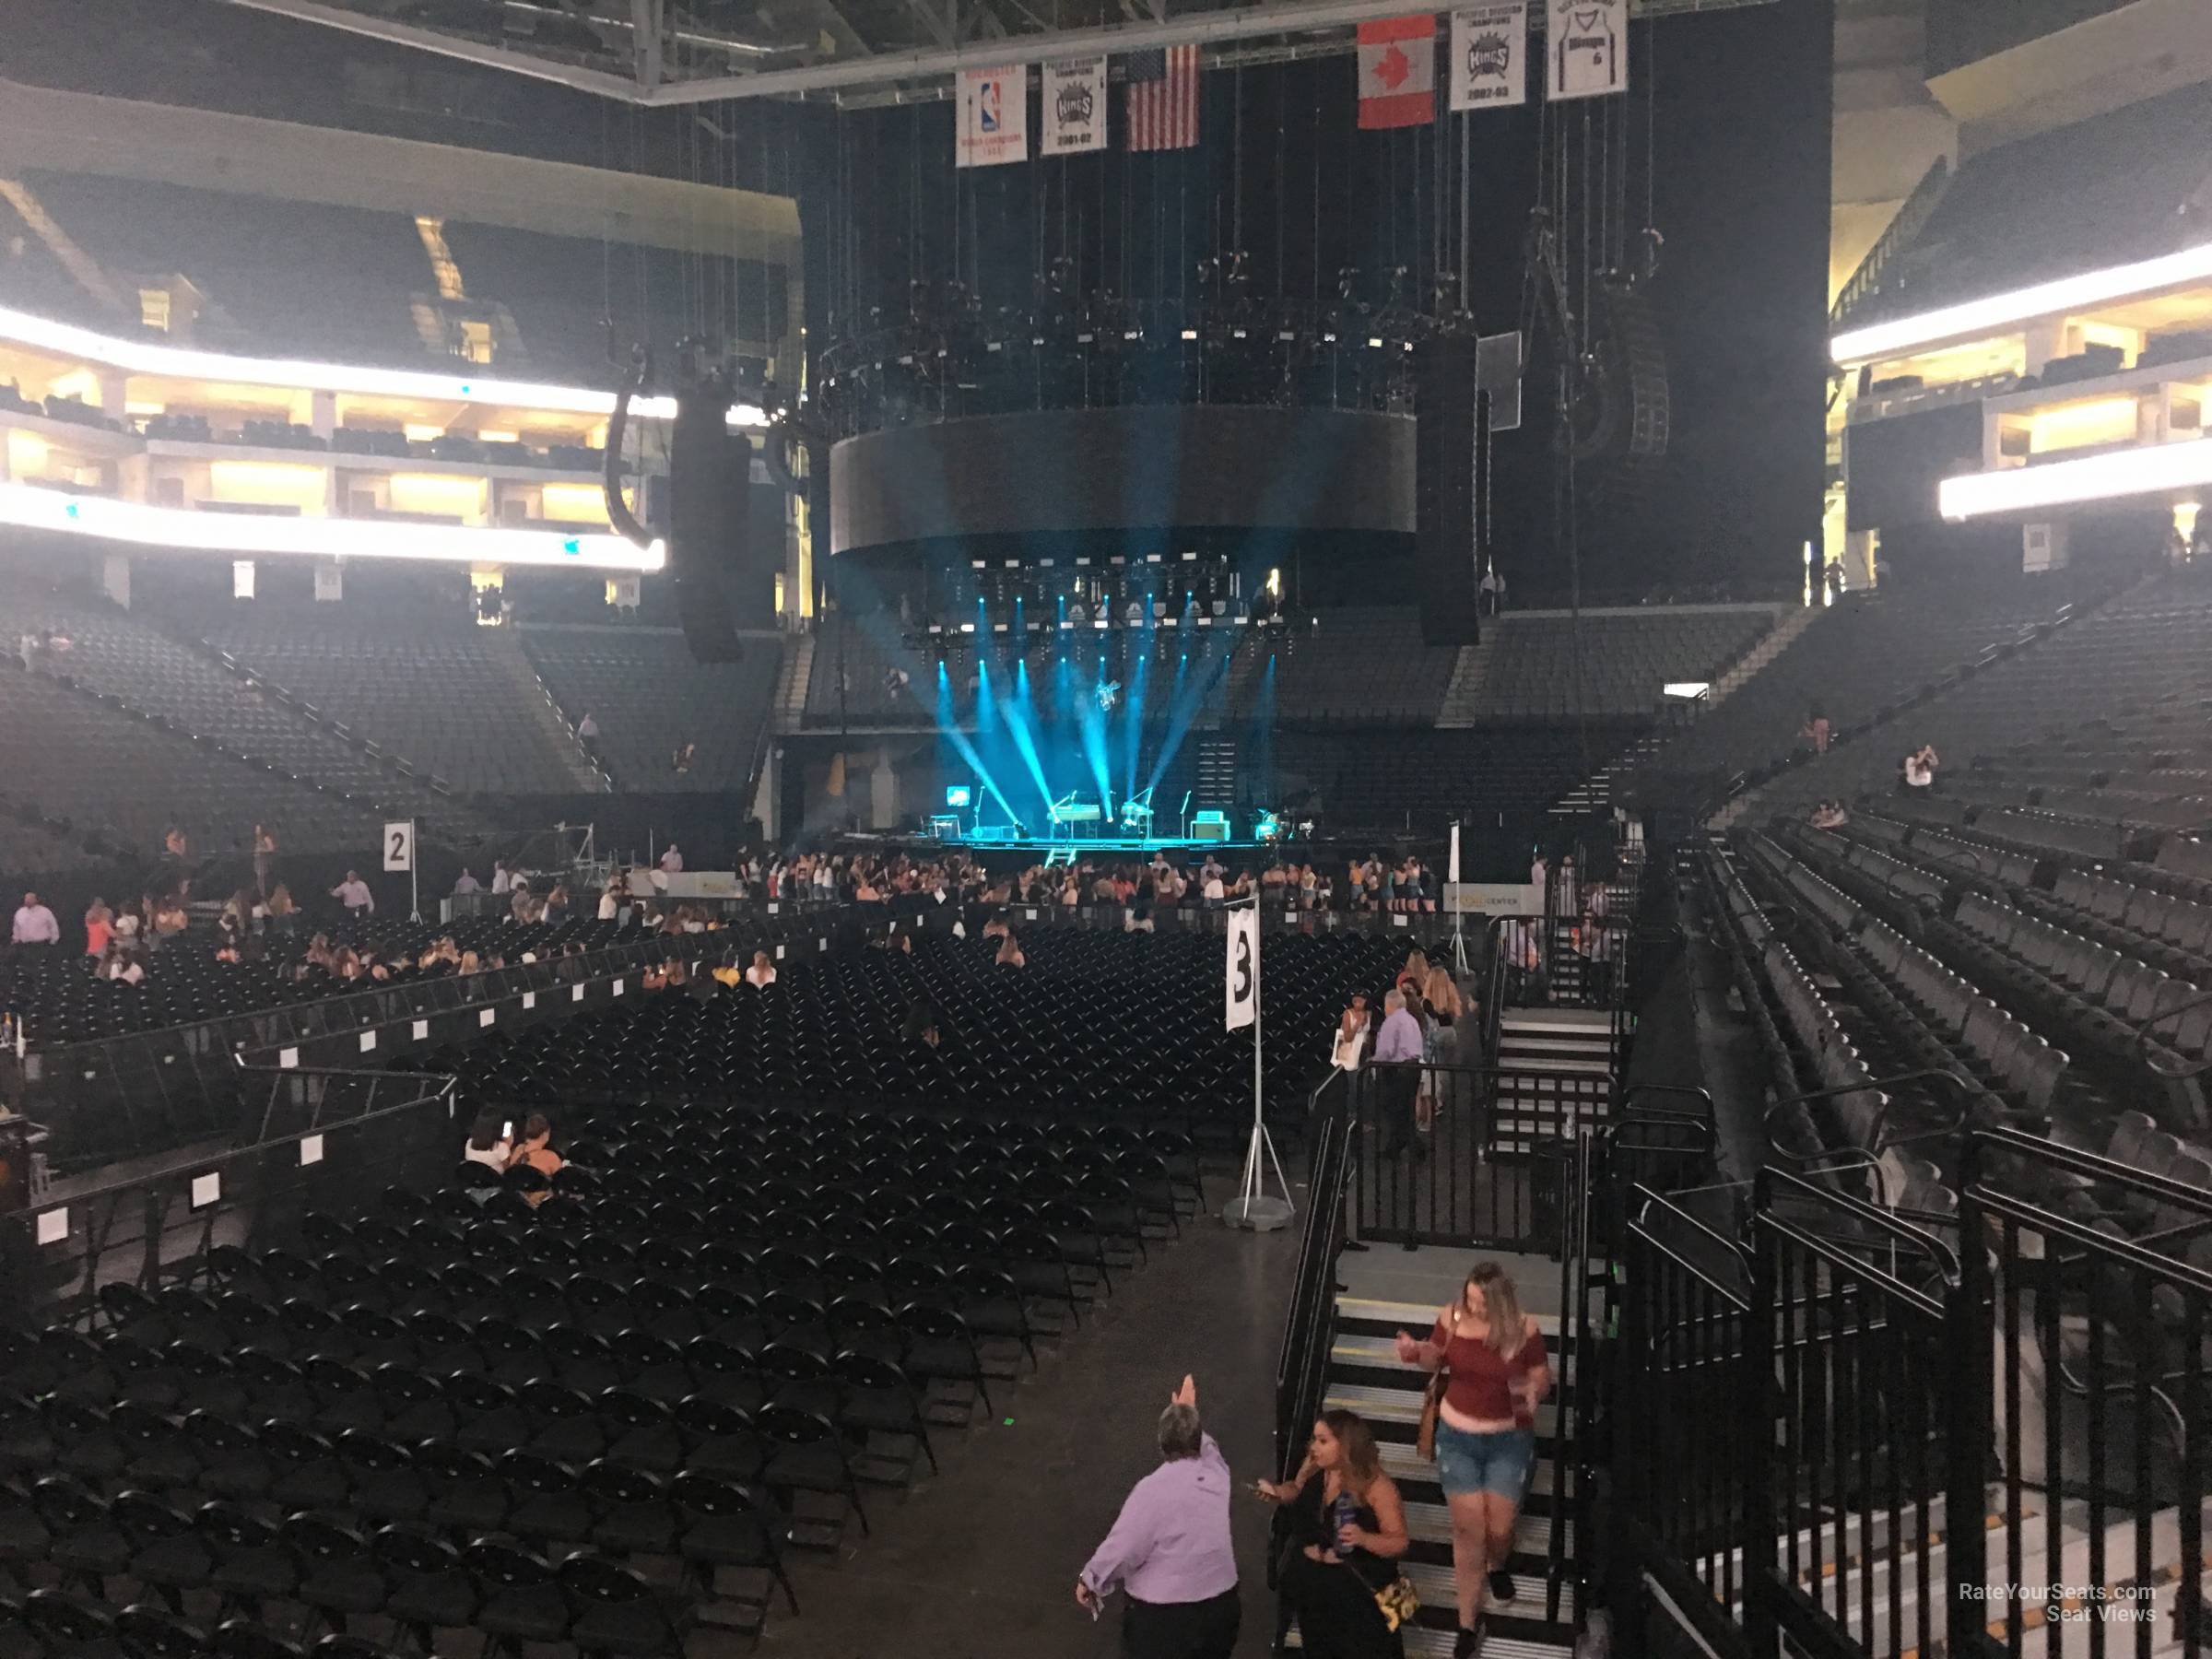 section 111, row a seat view  for concert - golden 1 center